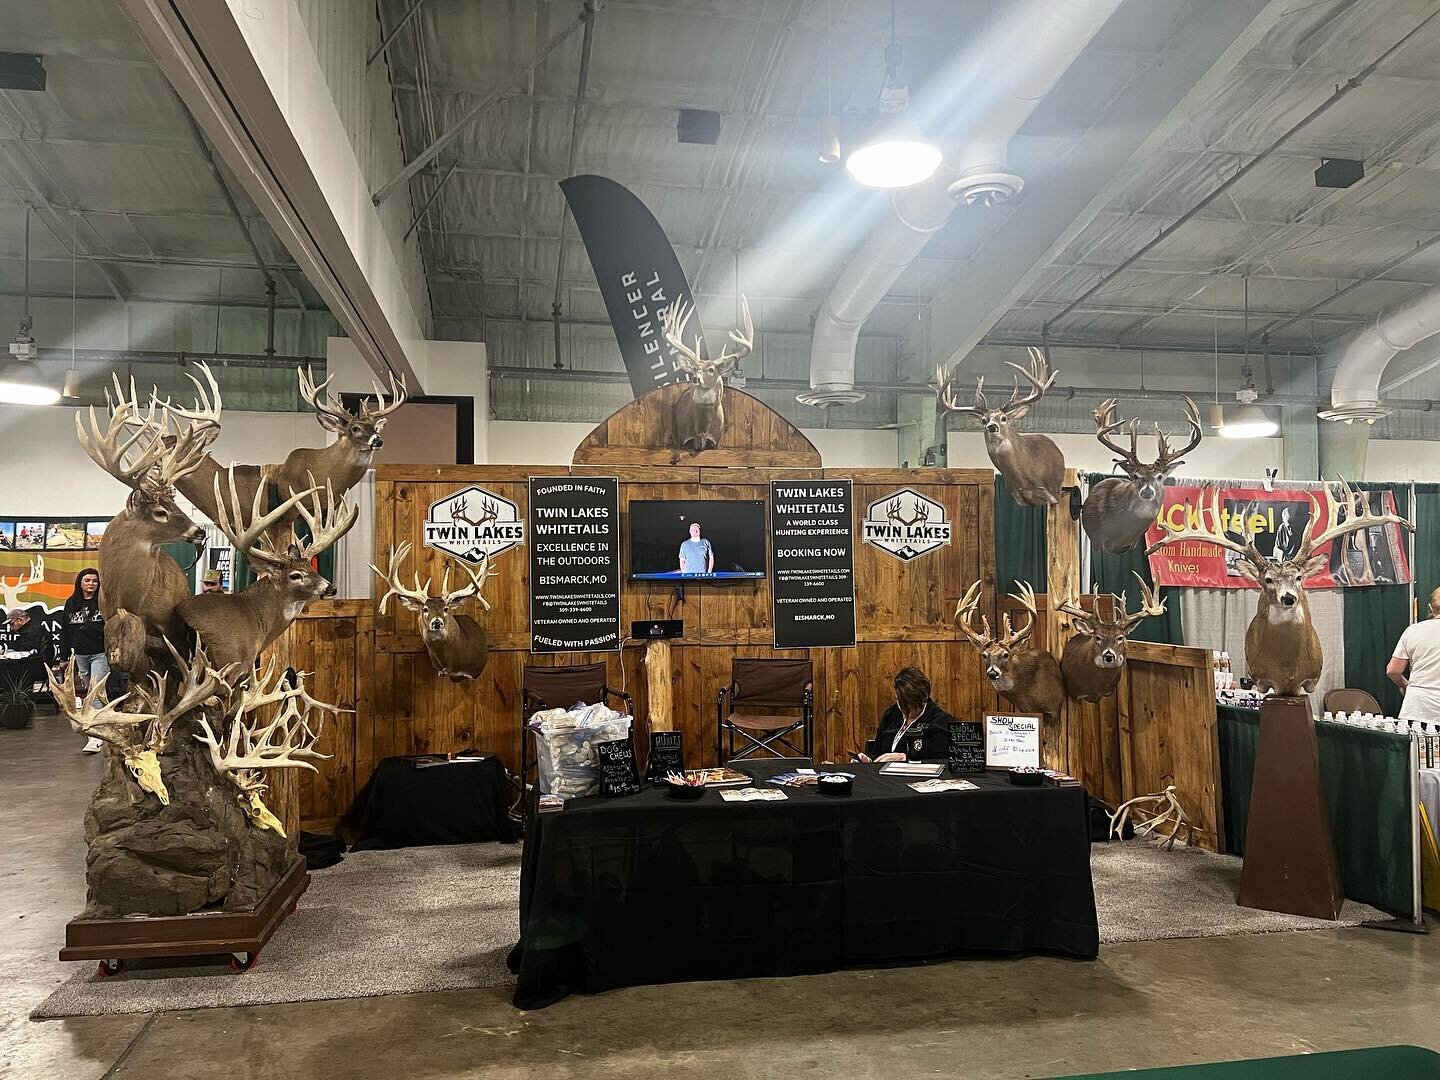 Come see us in the outfitter building at the Louisiana Sportsman Show this weekend booth 2312/2214. We would love to to discuss your next whitetail adventure! 
#Louisiana #louisianasportsman #twinlakeswhitetails #trophyhunting #bigbuck